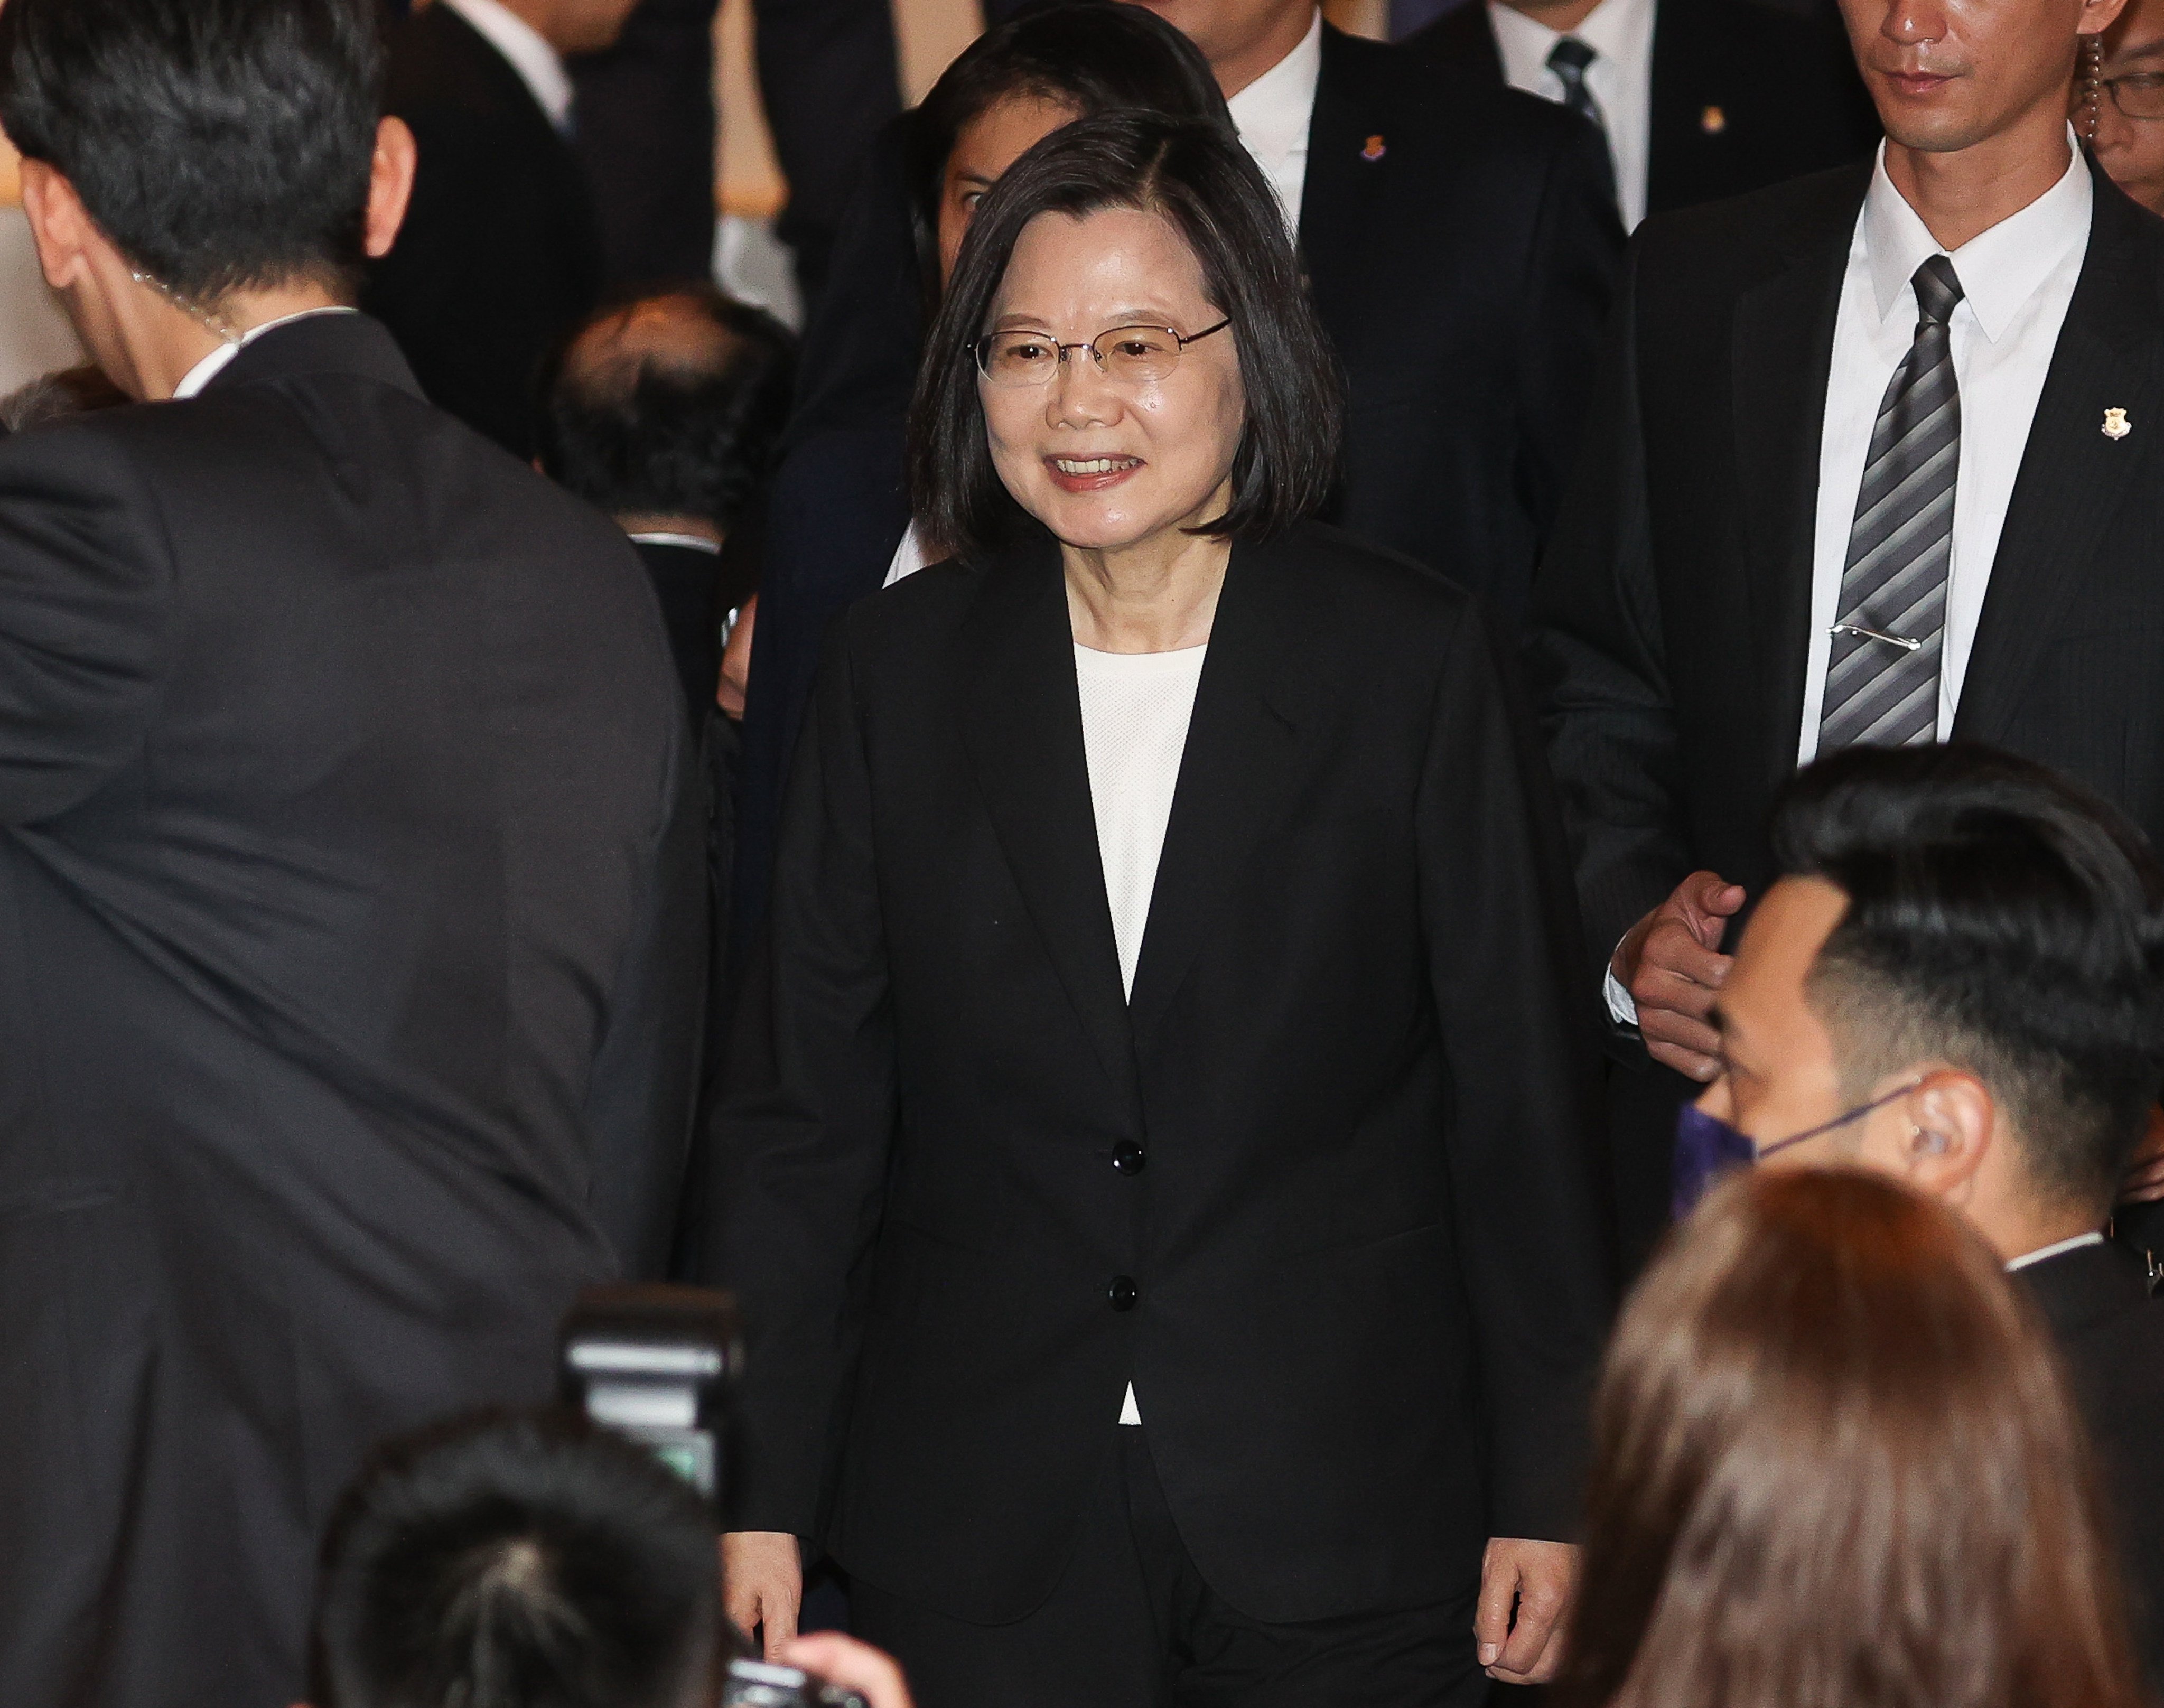 President Tsai Ing-wen has called on the world’s democracies to come together “in deterring adventurism and aggression in the region to ensure a peaceful future and the continuation of our shared values”. Photo: CNA